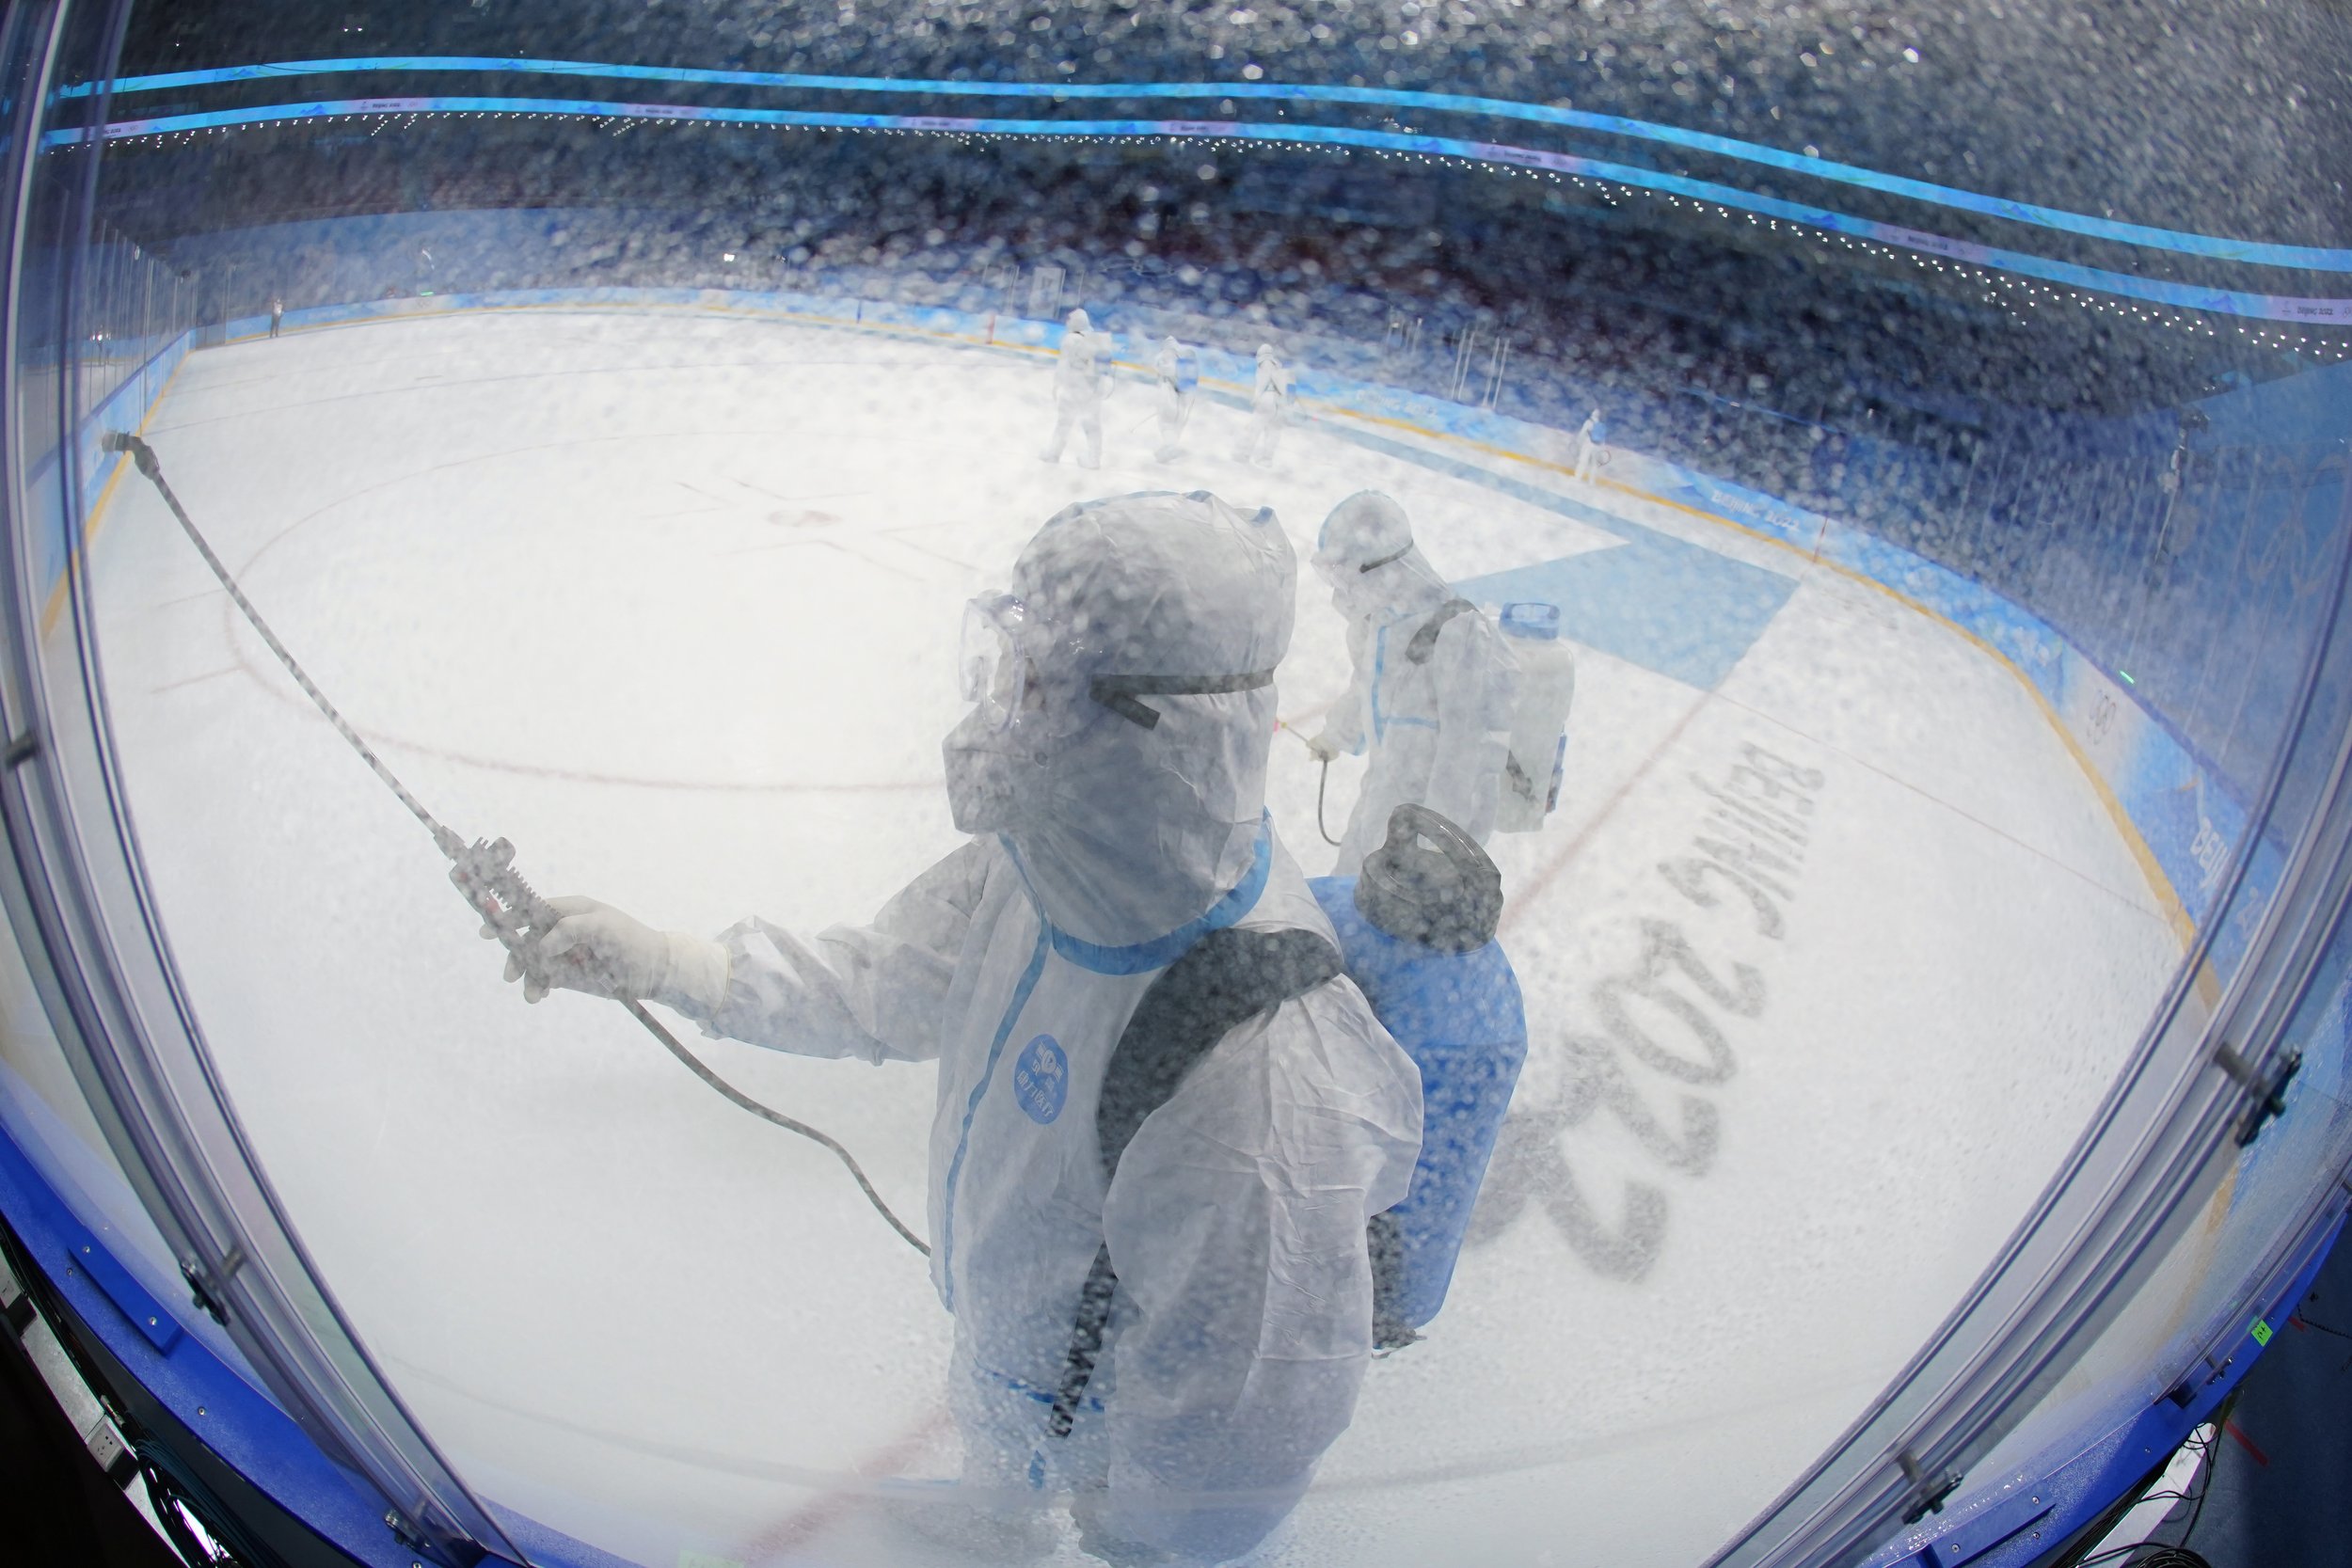  A worker disinfects the ice rink after the women's gold medal hockey game at the 2022 Winter Olympics, Thursday, Feb. 17, 2022, in Beijing. (AP Photo/Matt Slocum) 